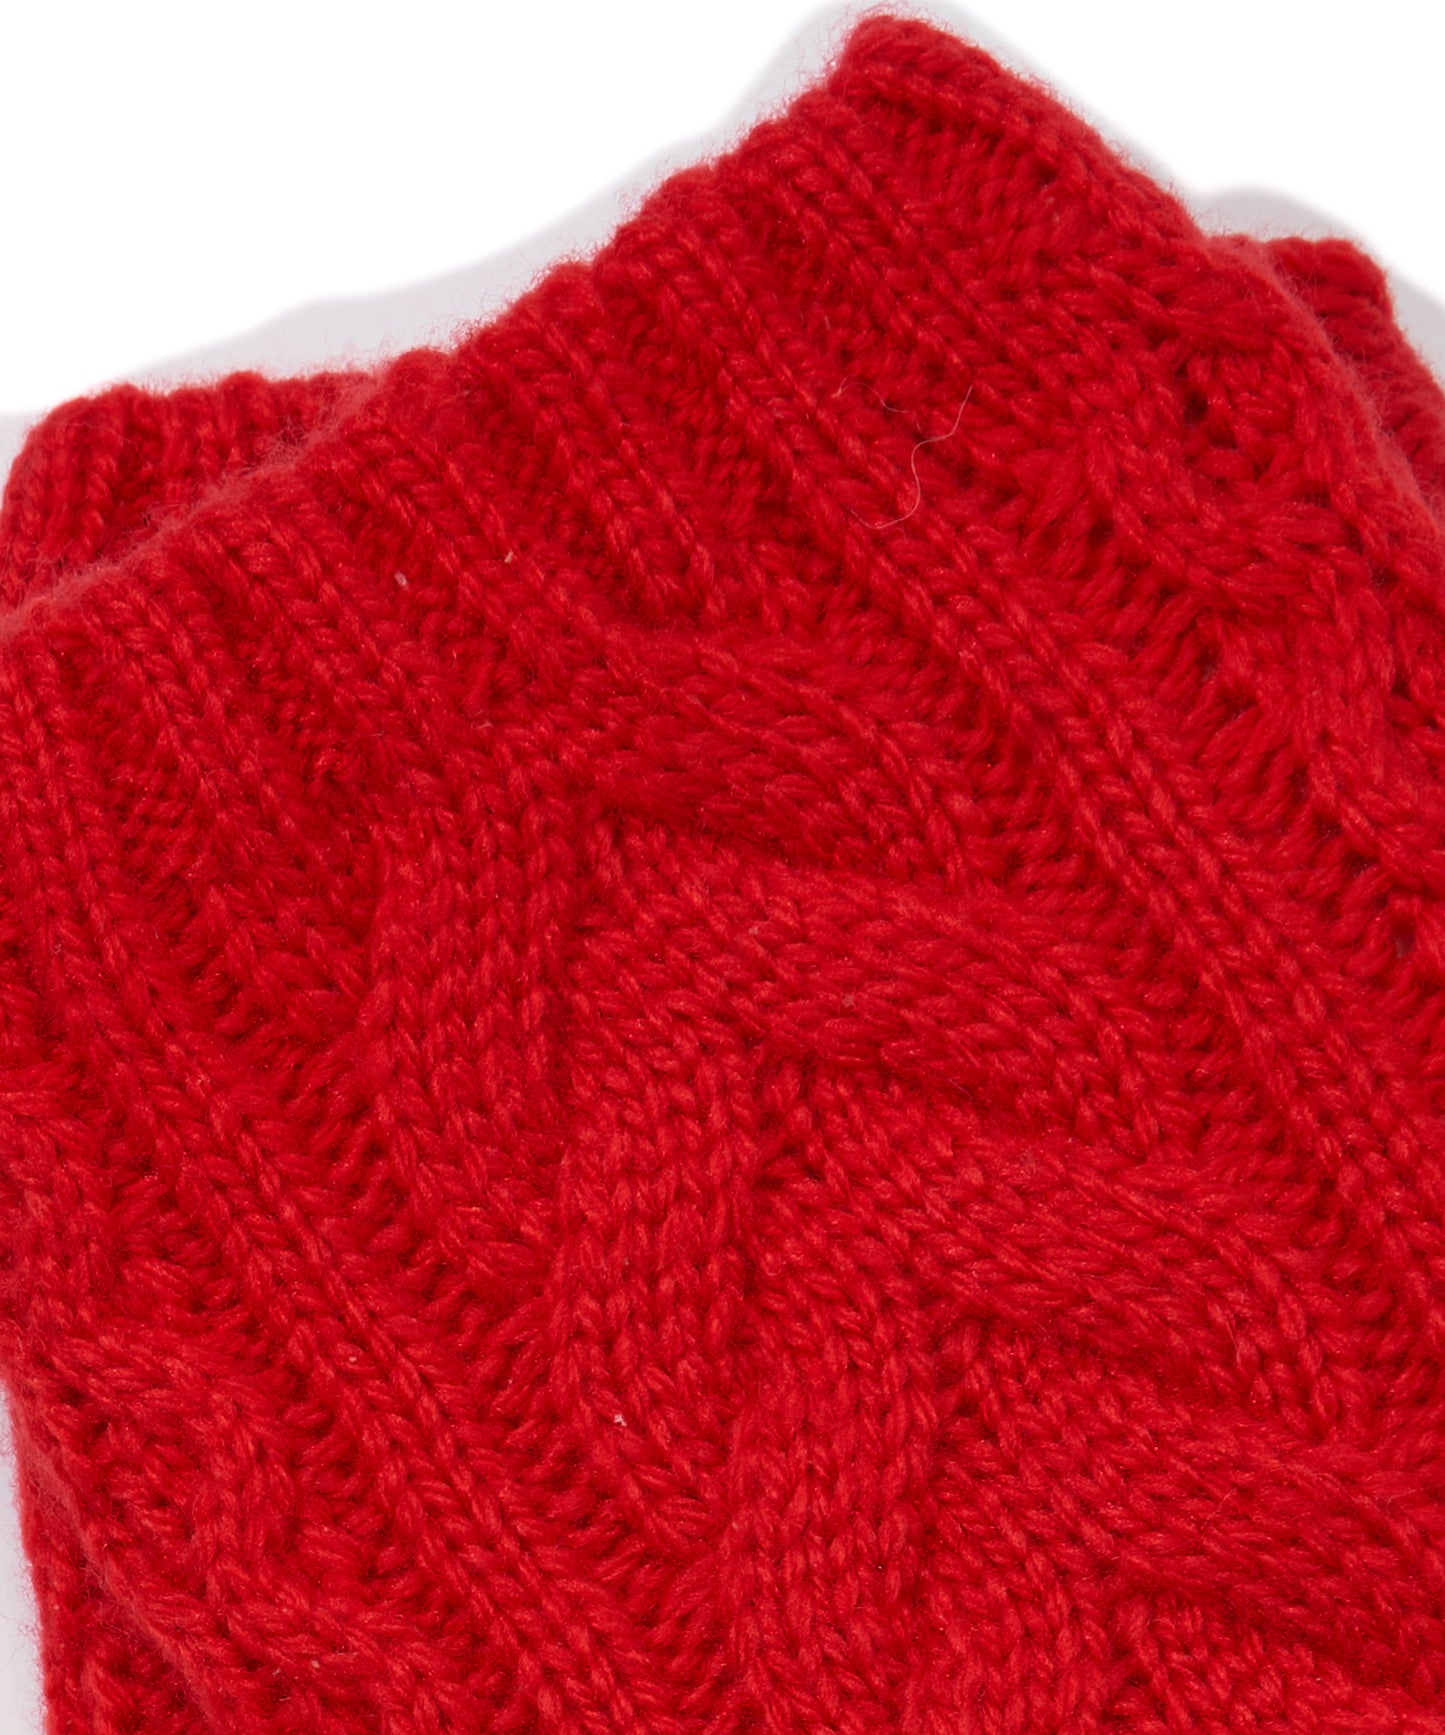 Recycled Wishbone Cable Handwarmer in color Red